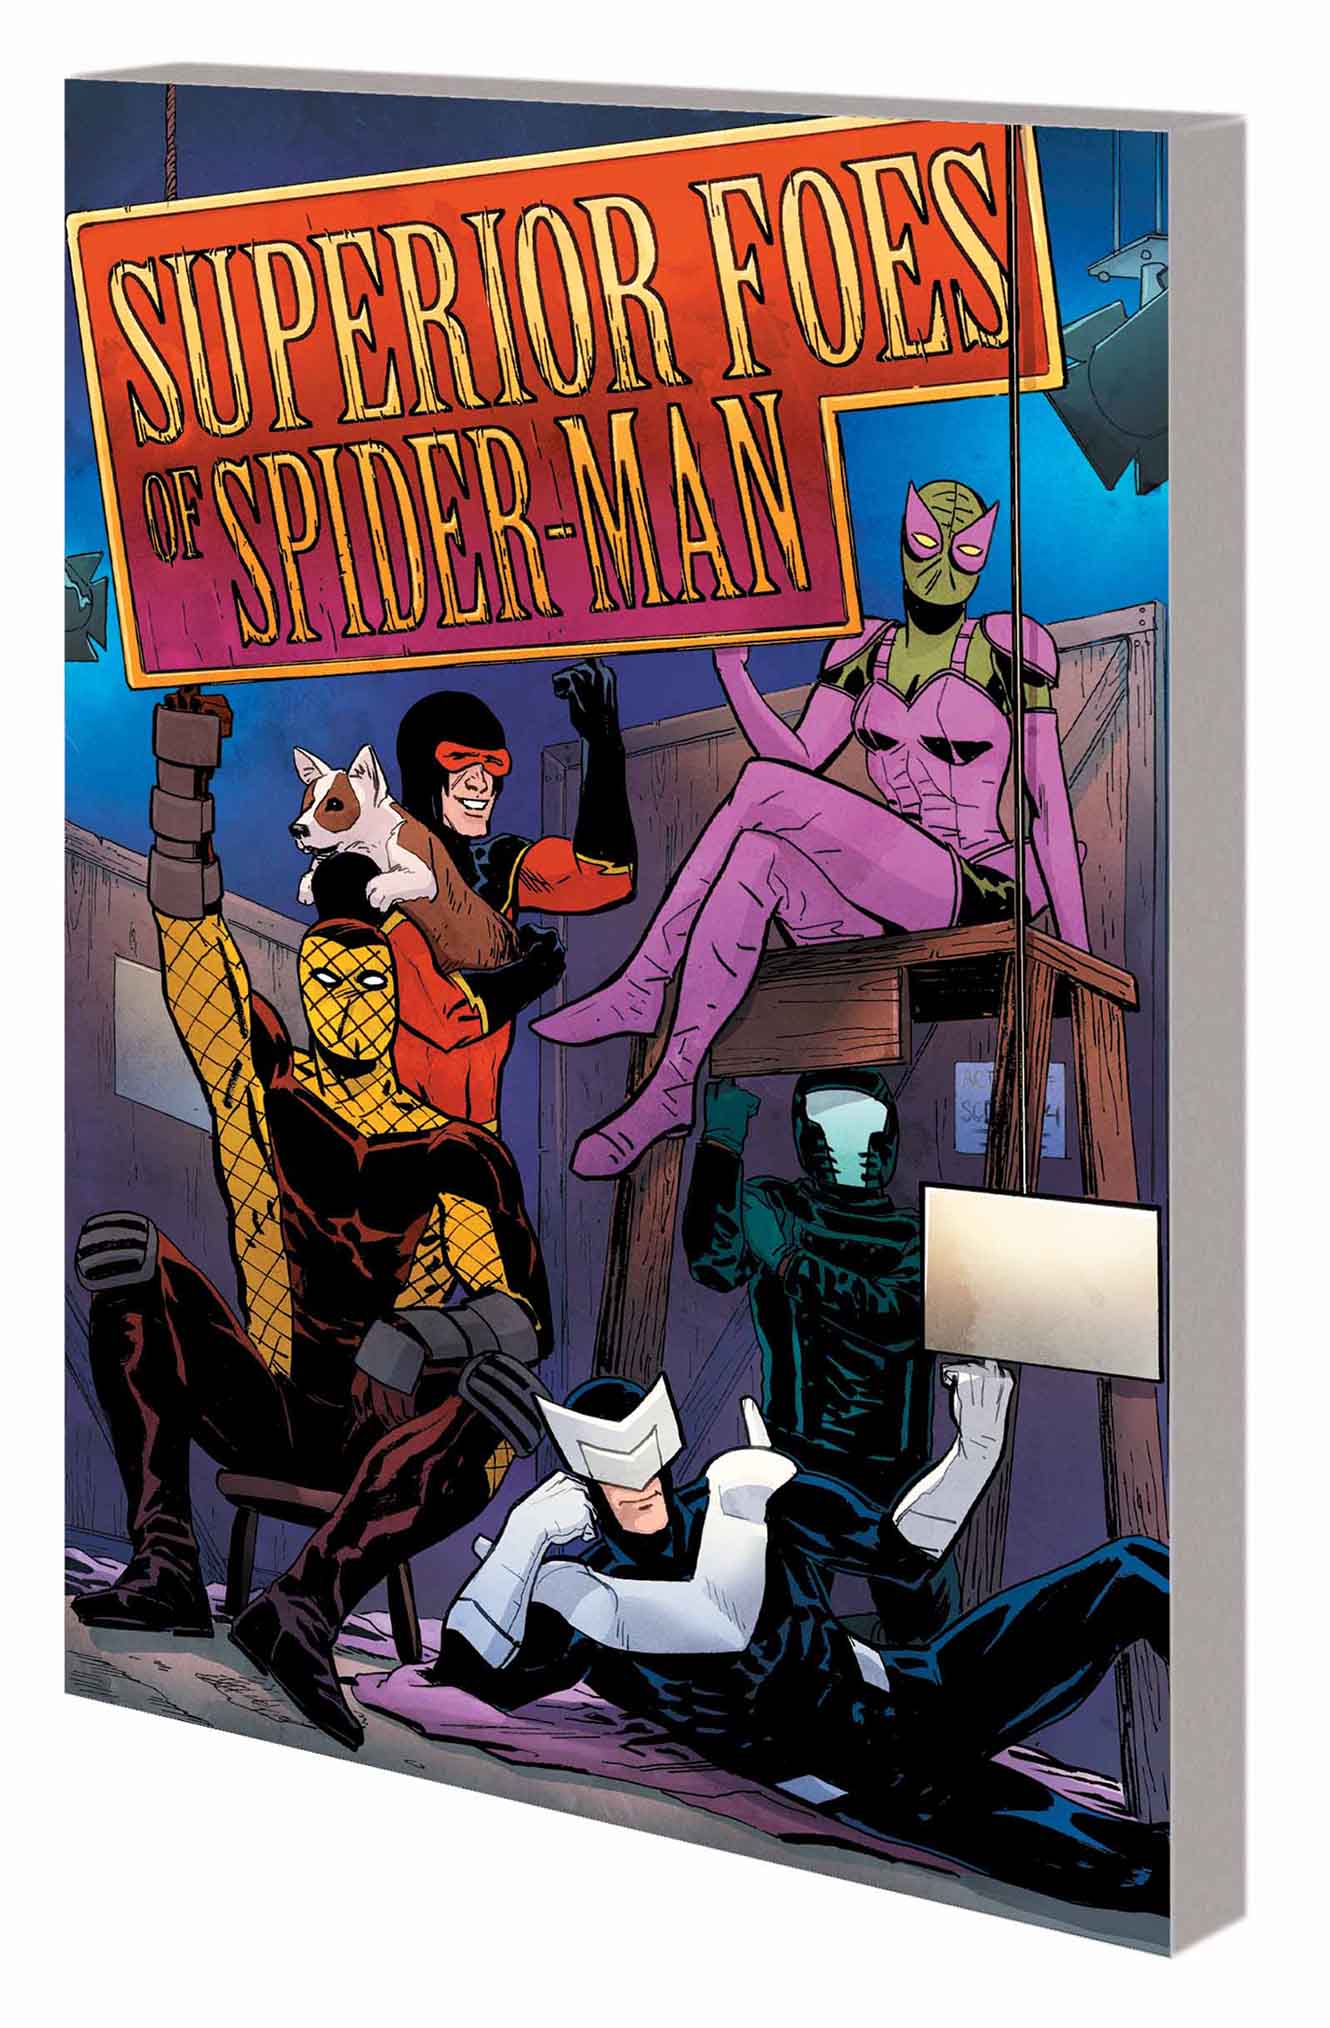 The Superior Foes of Spider-Man Vol. 3 (Trade Paperback)